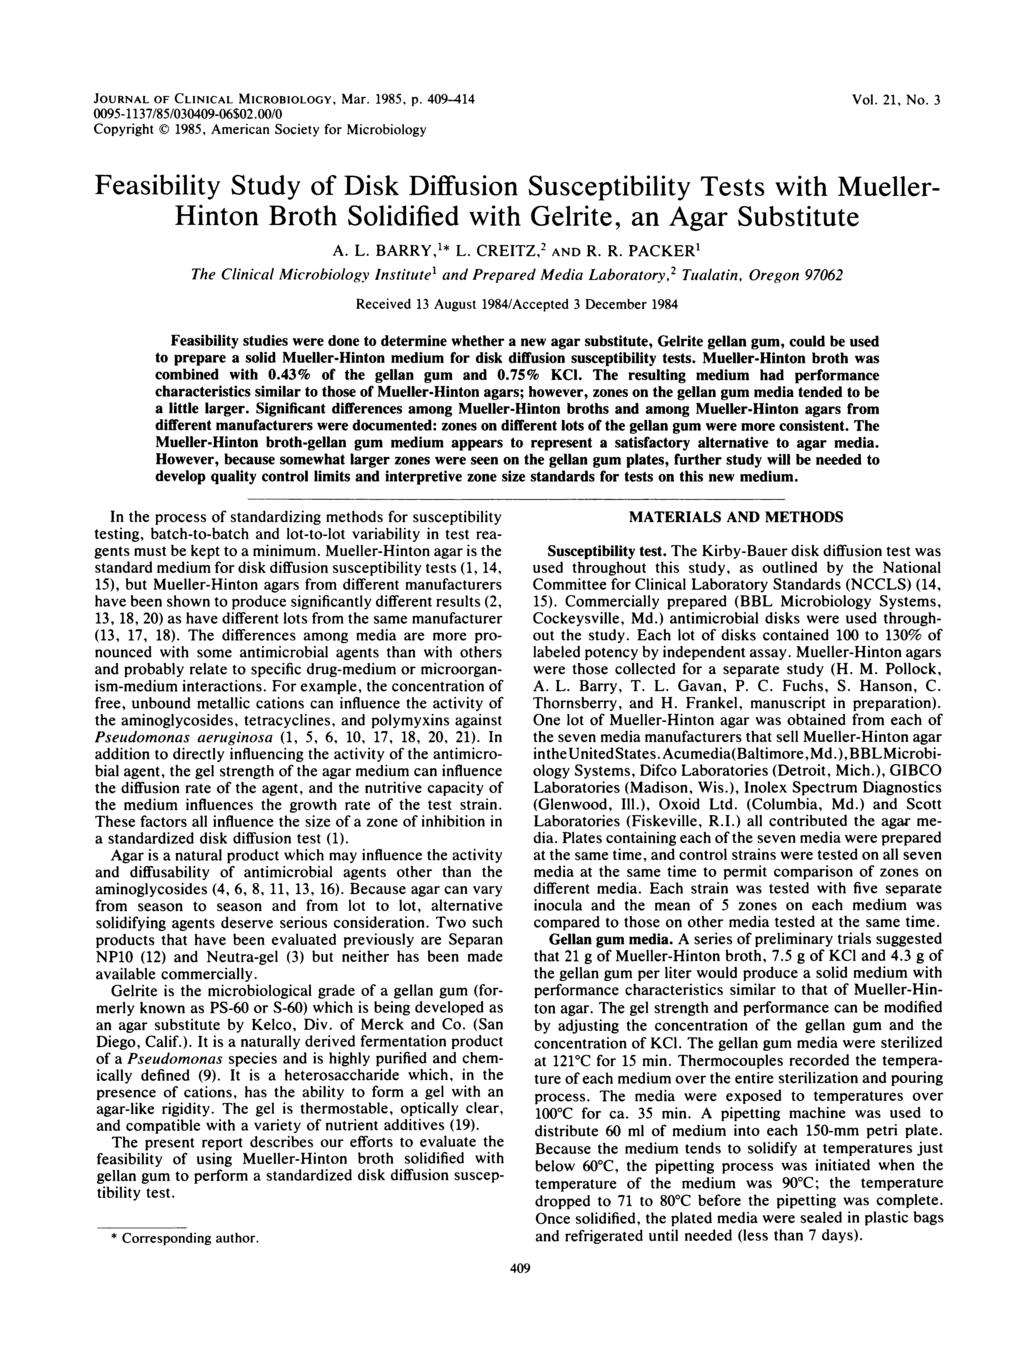 JOURNAL OF CLINICAL MICROBIOLOGY, Mar. 1985, p. 409-414 0095-1137/85/030409-06$02.00/0 Copyright (O 1985, American Society for Microbiology Vol. 21, No.